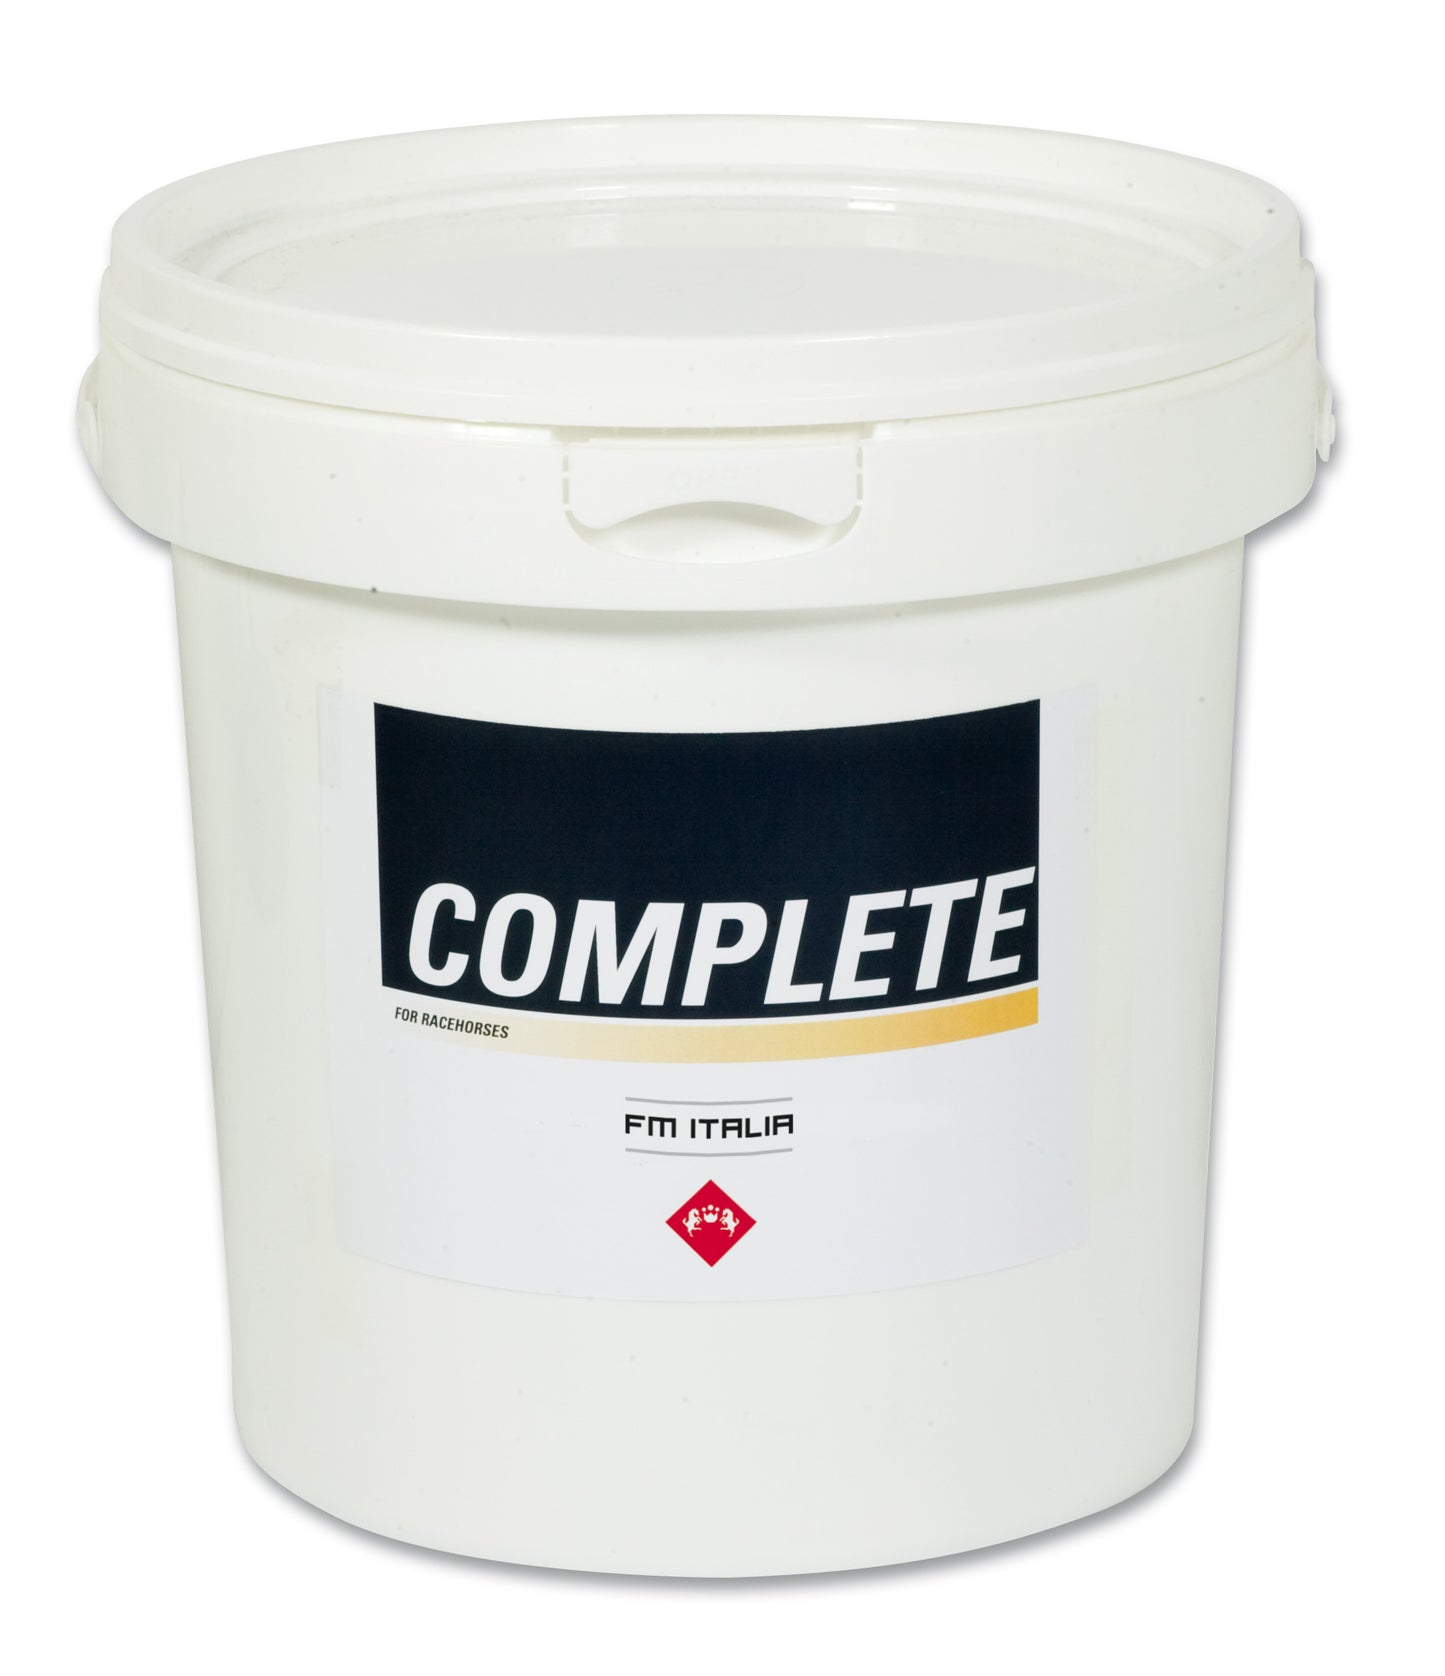 COMPLETE | Powder Complementary Feed for Vitamin, Mineral, and Amino Acid Enrichment